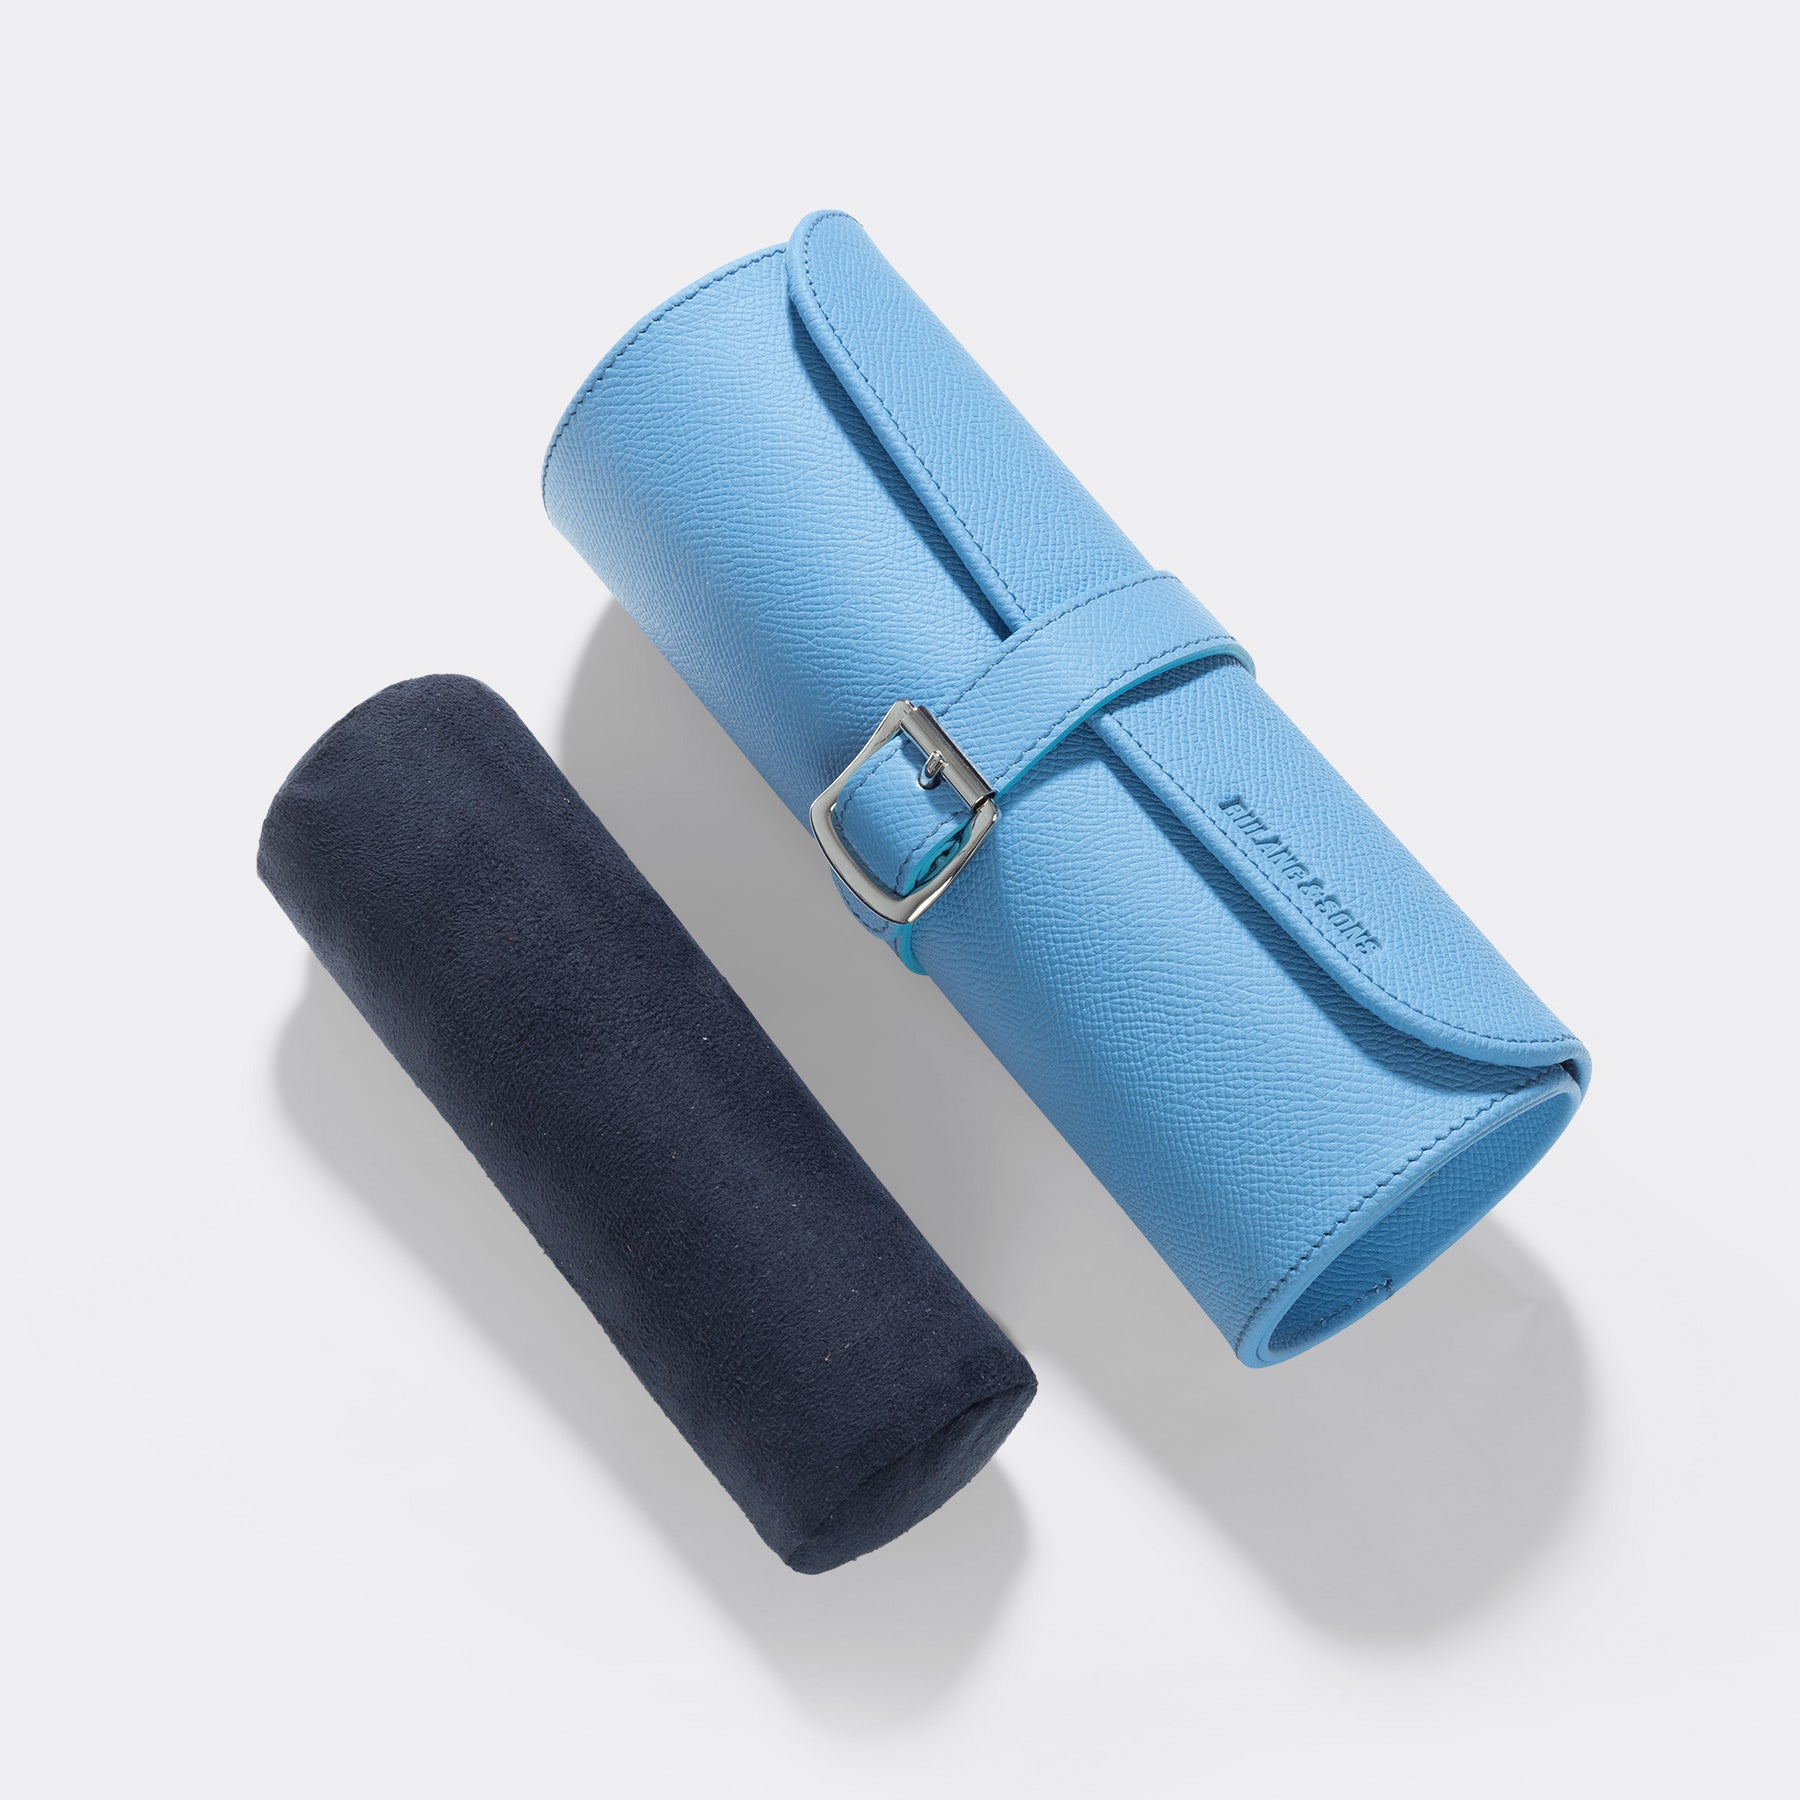 Sky Blue 3 Watch Leather Tube